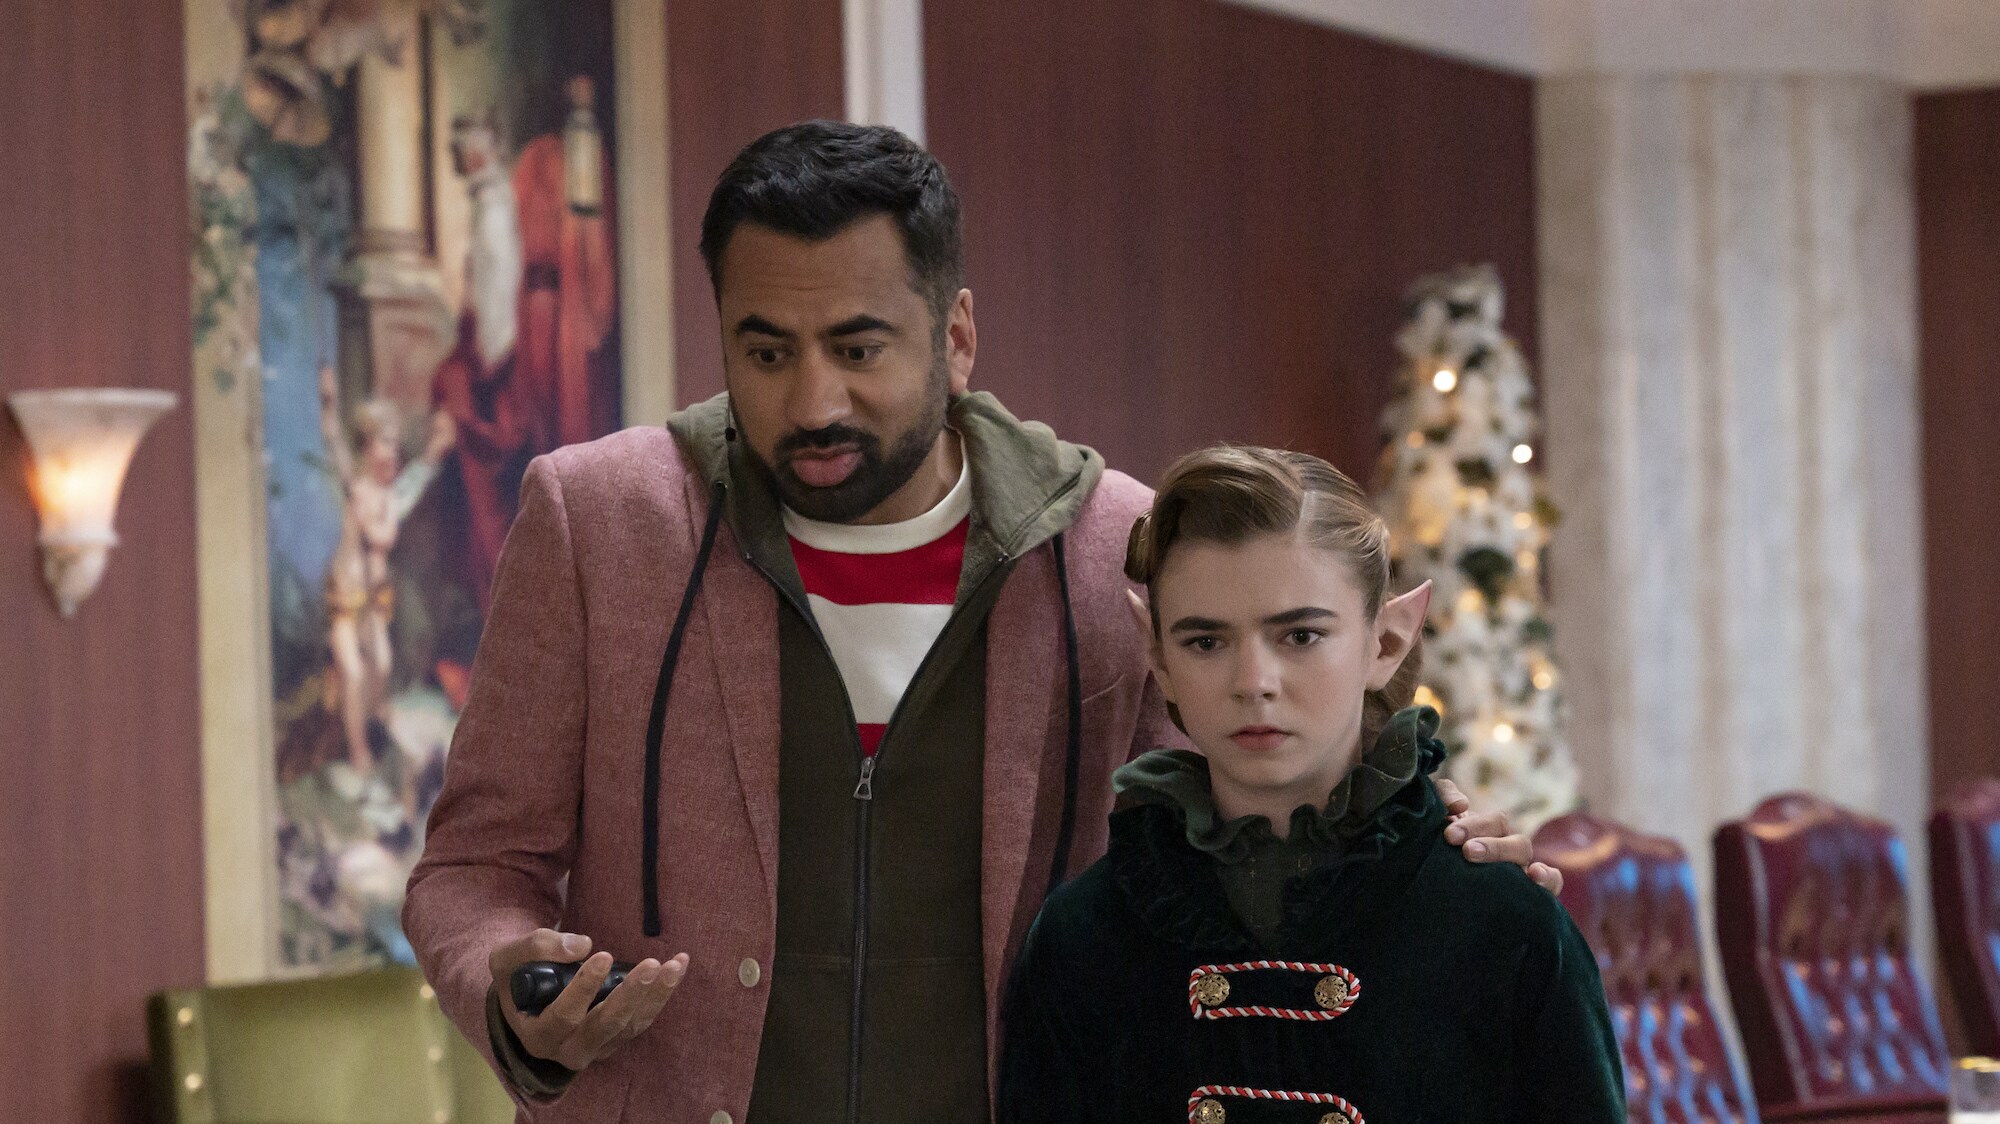 THE SANTA CLAUSES - “Chapter Four: The Shoes Off the Bed Clause” (Disney/James Clark) KAL PENN, MATILDA LAWLER